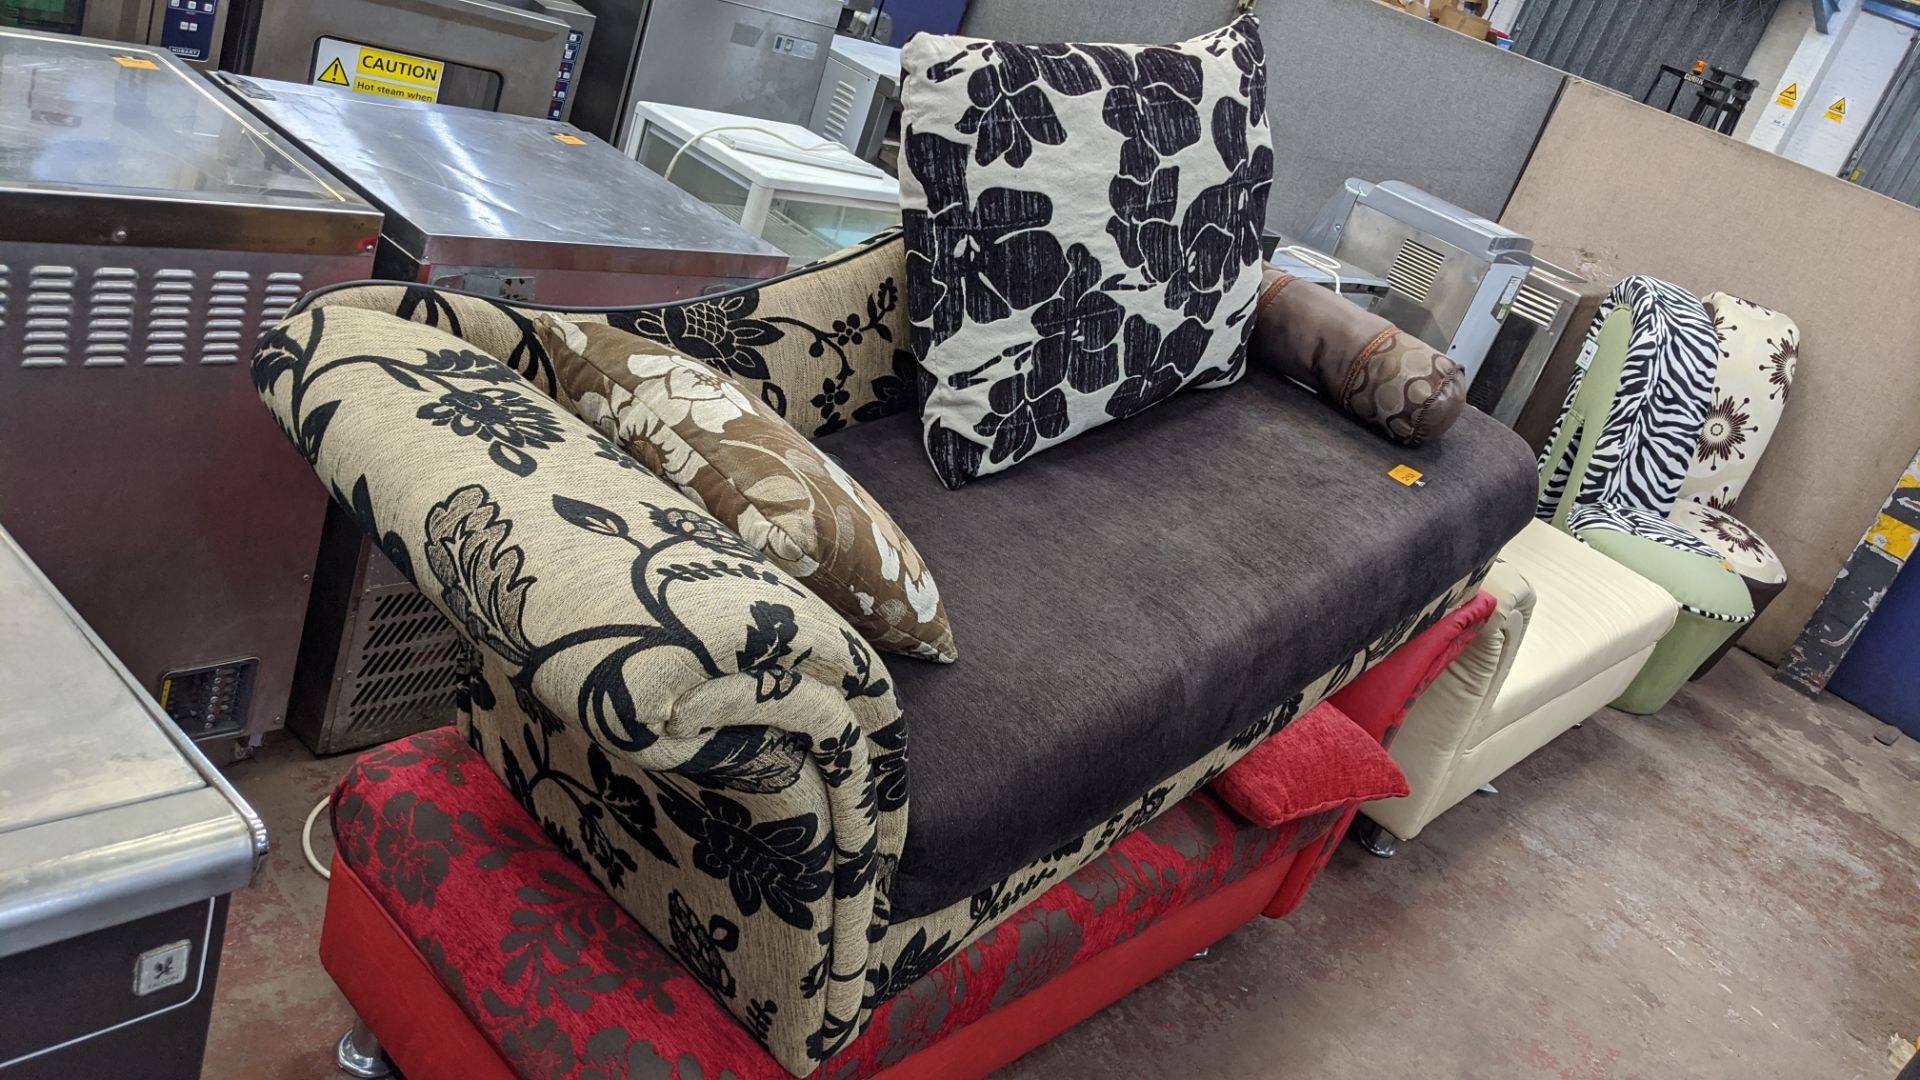 Chaise longue including a variety of different cushions, max. dimensions approx. 1770 x 600 x 600mm - Image 2 of 4